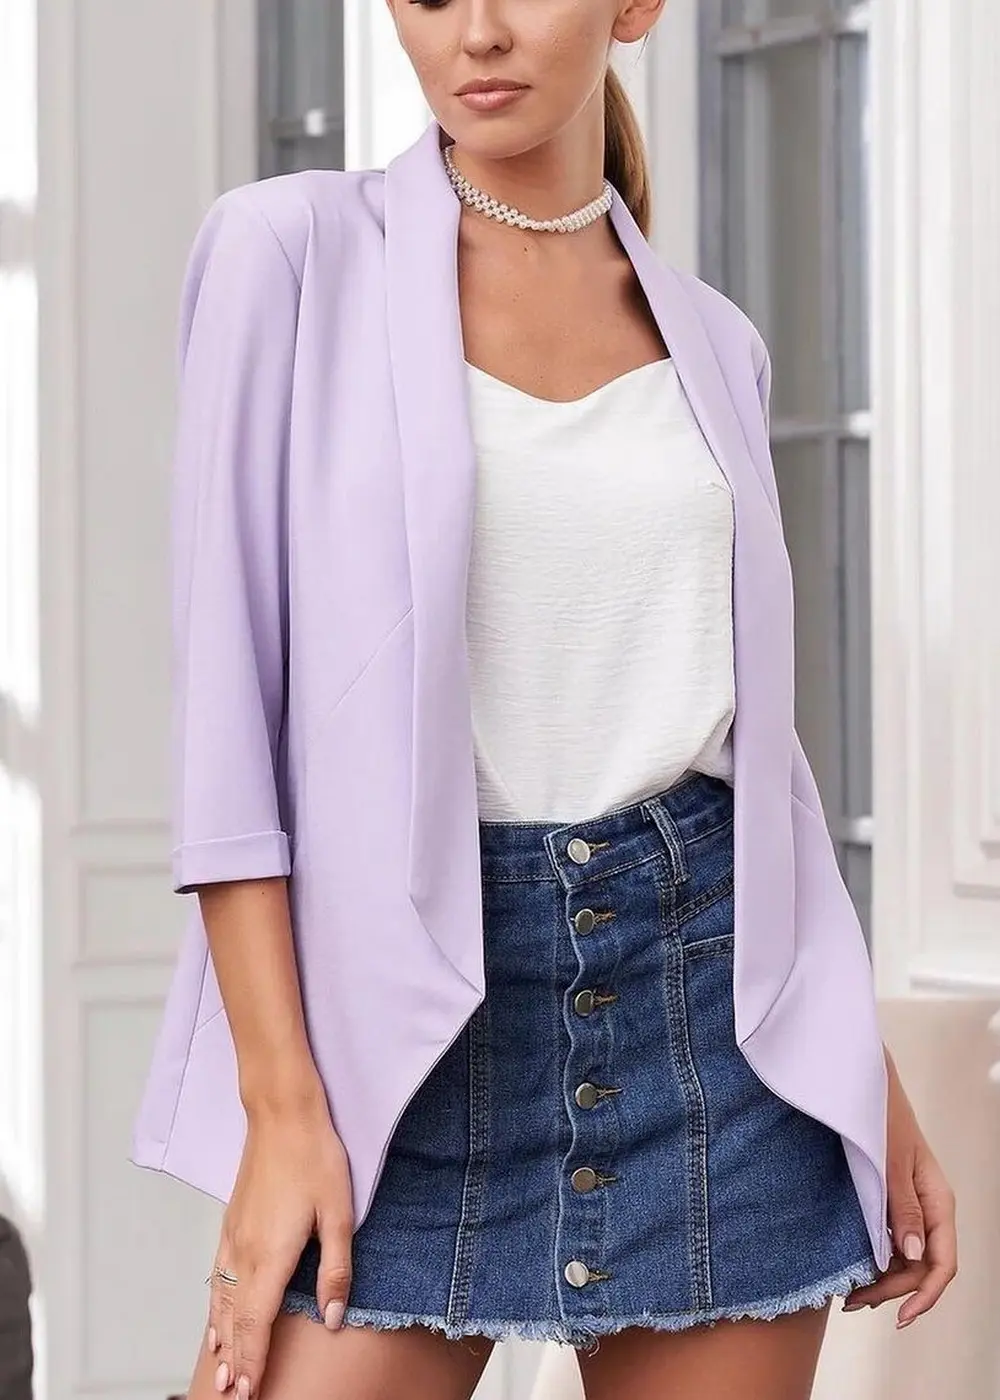 lilac blazer paired with white top and denim mini skirt